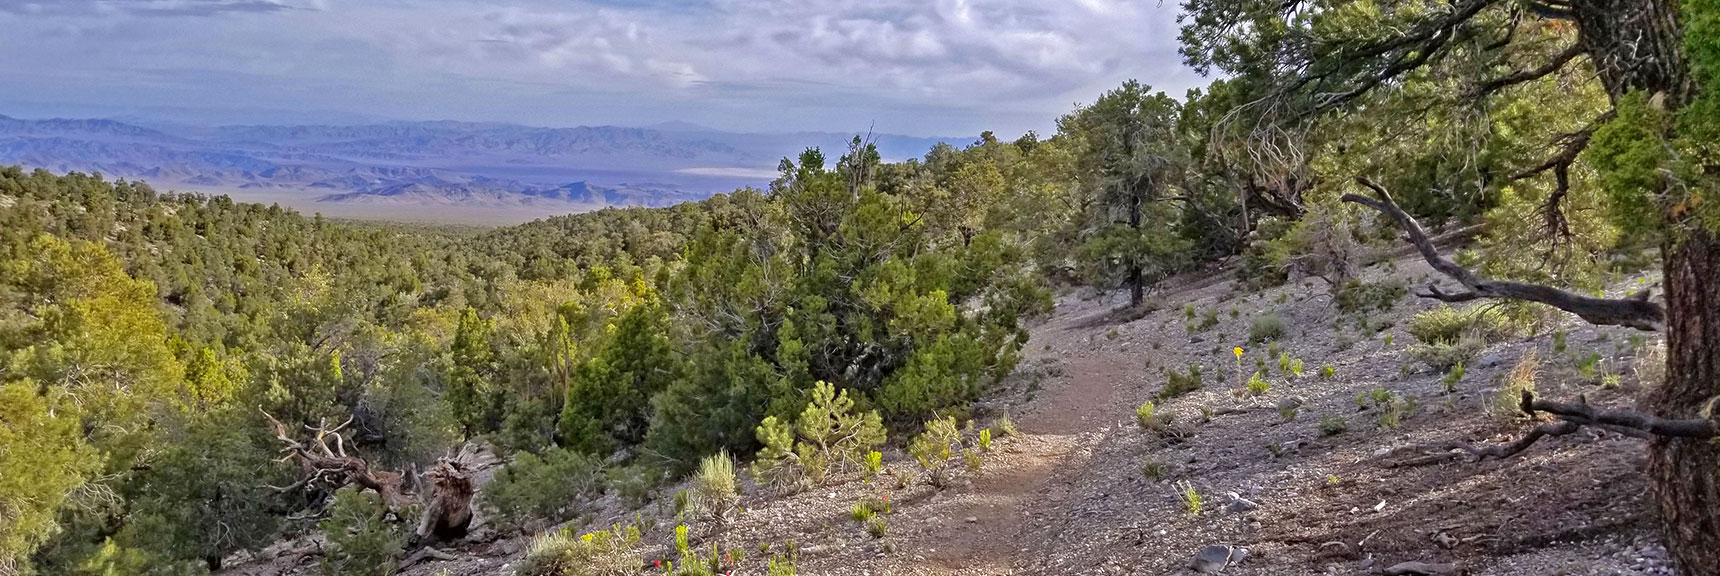 View of the Center of Mud Springs Loop and Beyond. | Pinyon Pine Loop Trail | Sawmill Trailhead | Lee Canyon | Mt Charleston Wilderness | Spring Mountains, Nevada